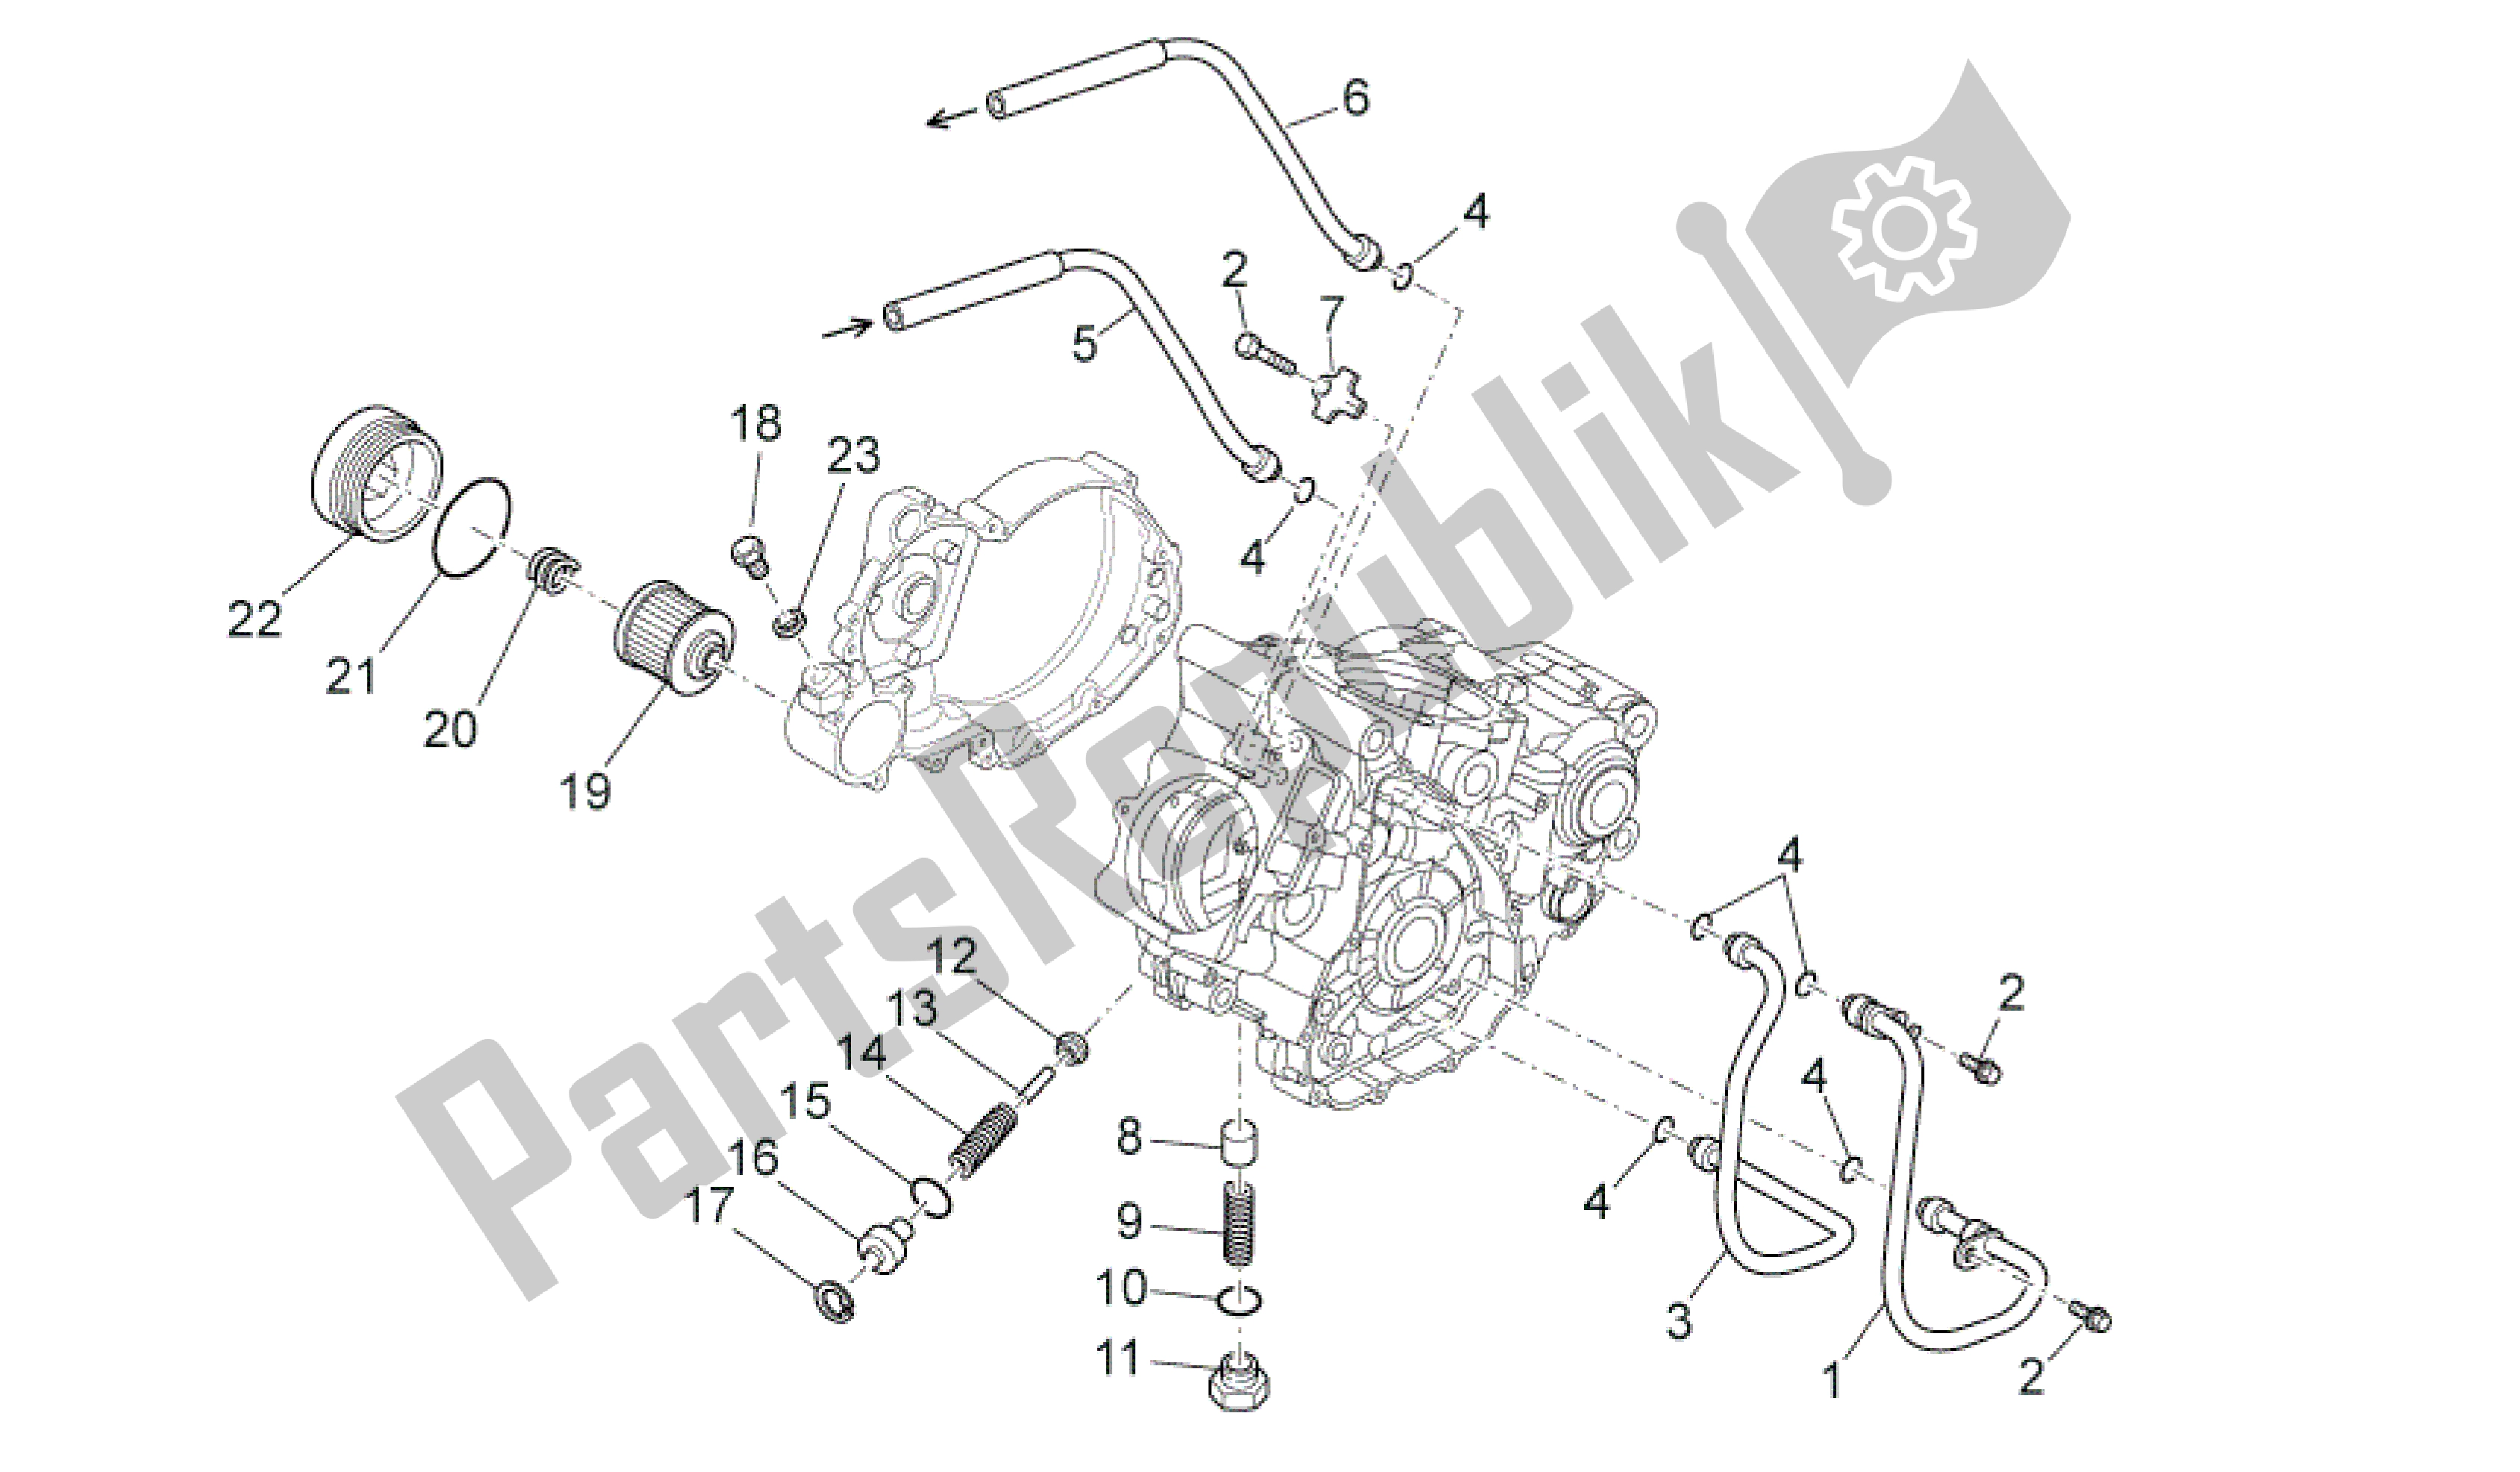 All parts for the Lubrication of the Aprilia RXV 550 2009 - 2011